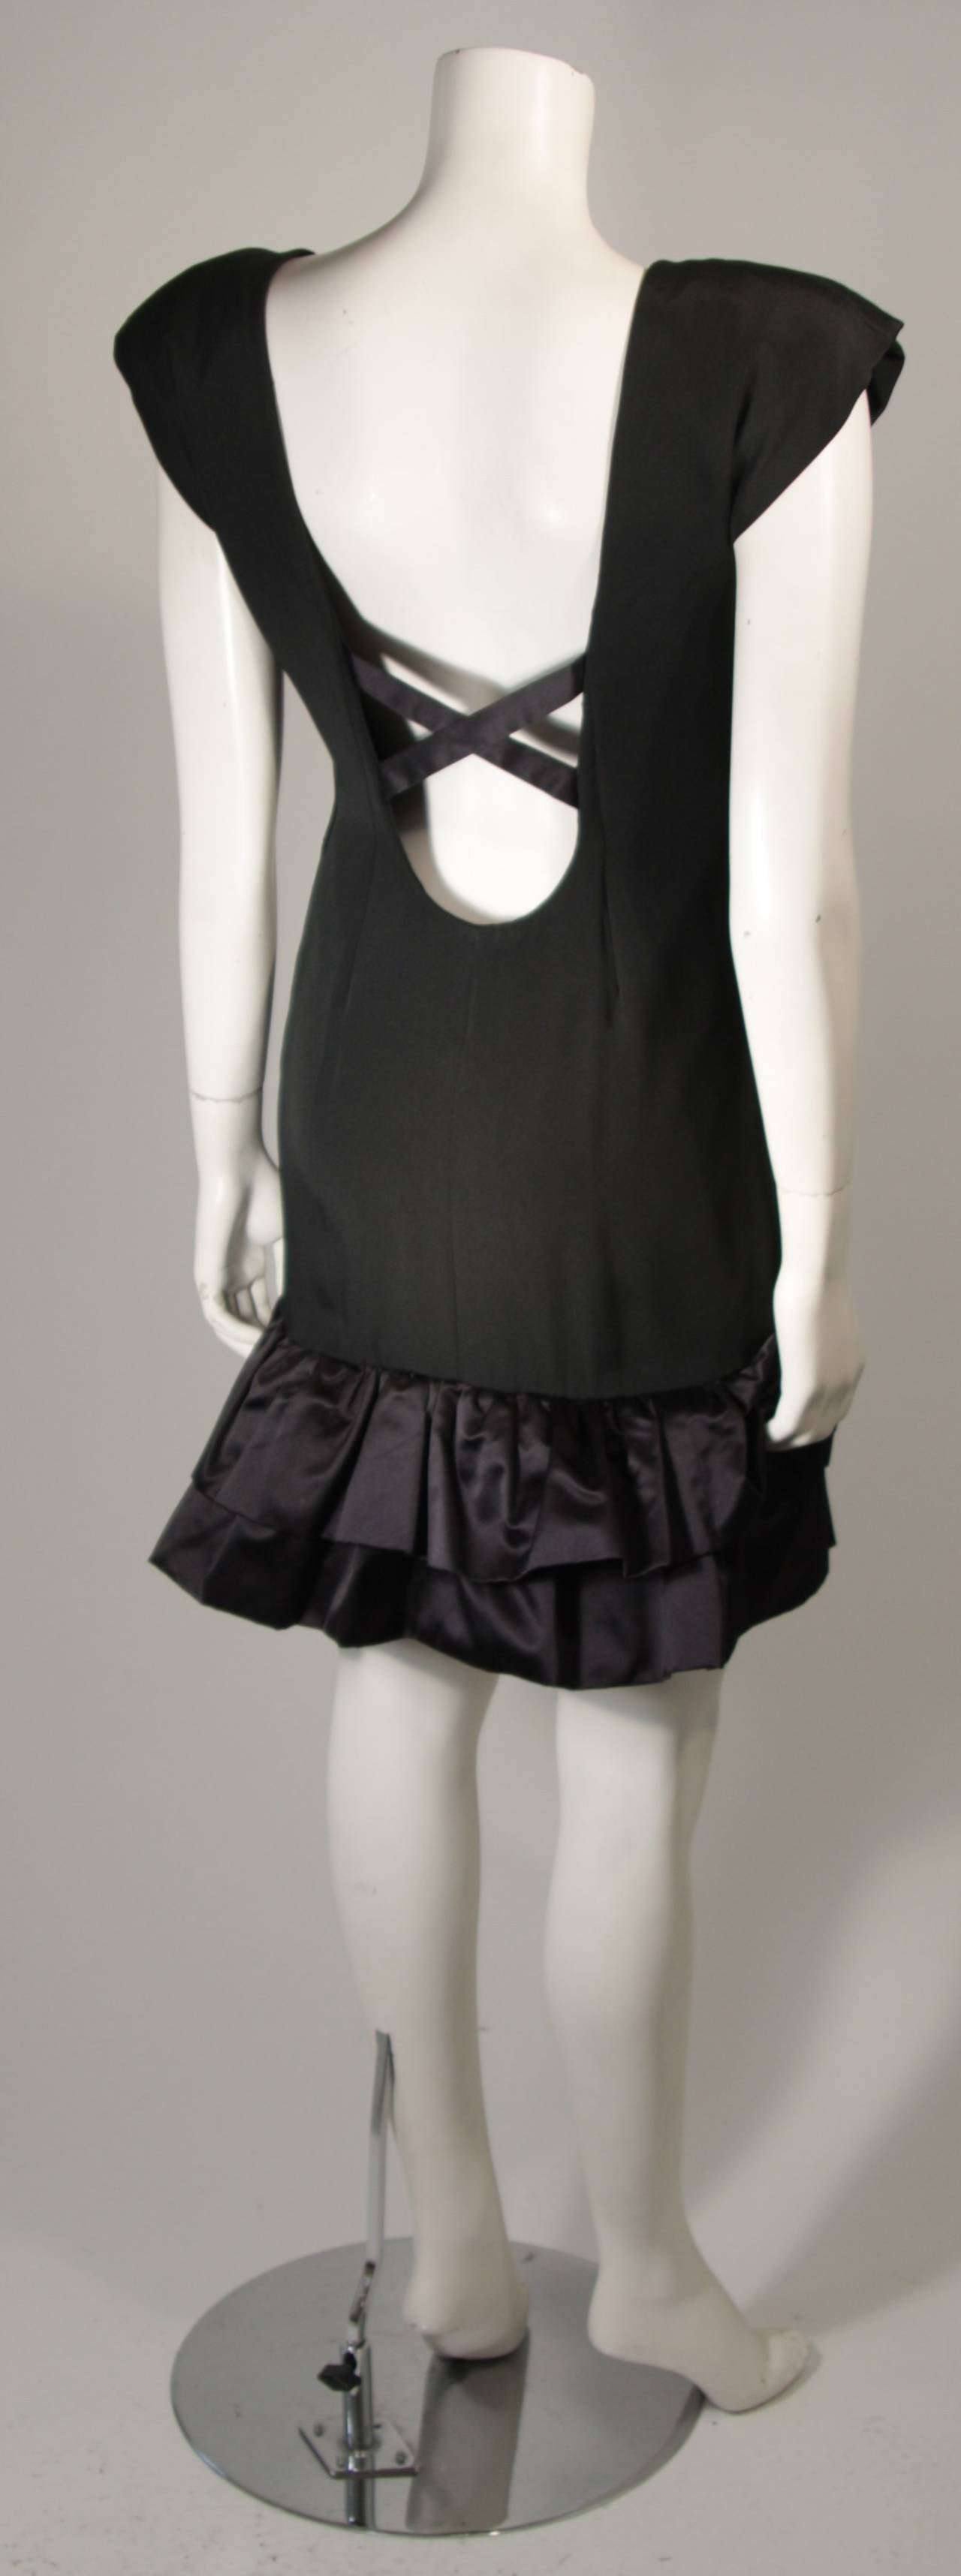 Vicky Tiel Black Silk Cocktail Dress with Criss Cross Back Size Small 3